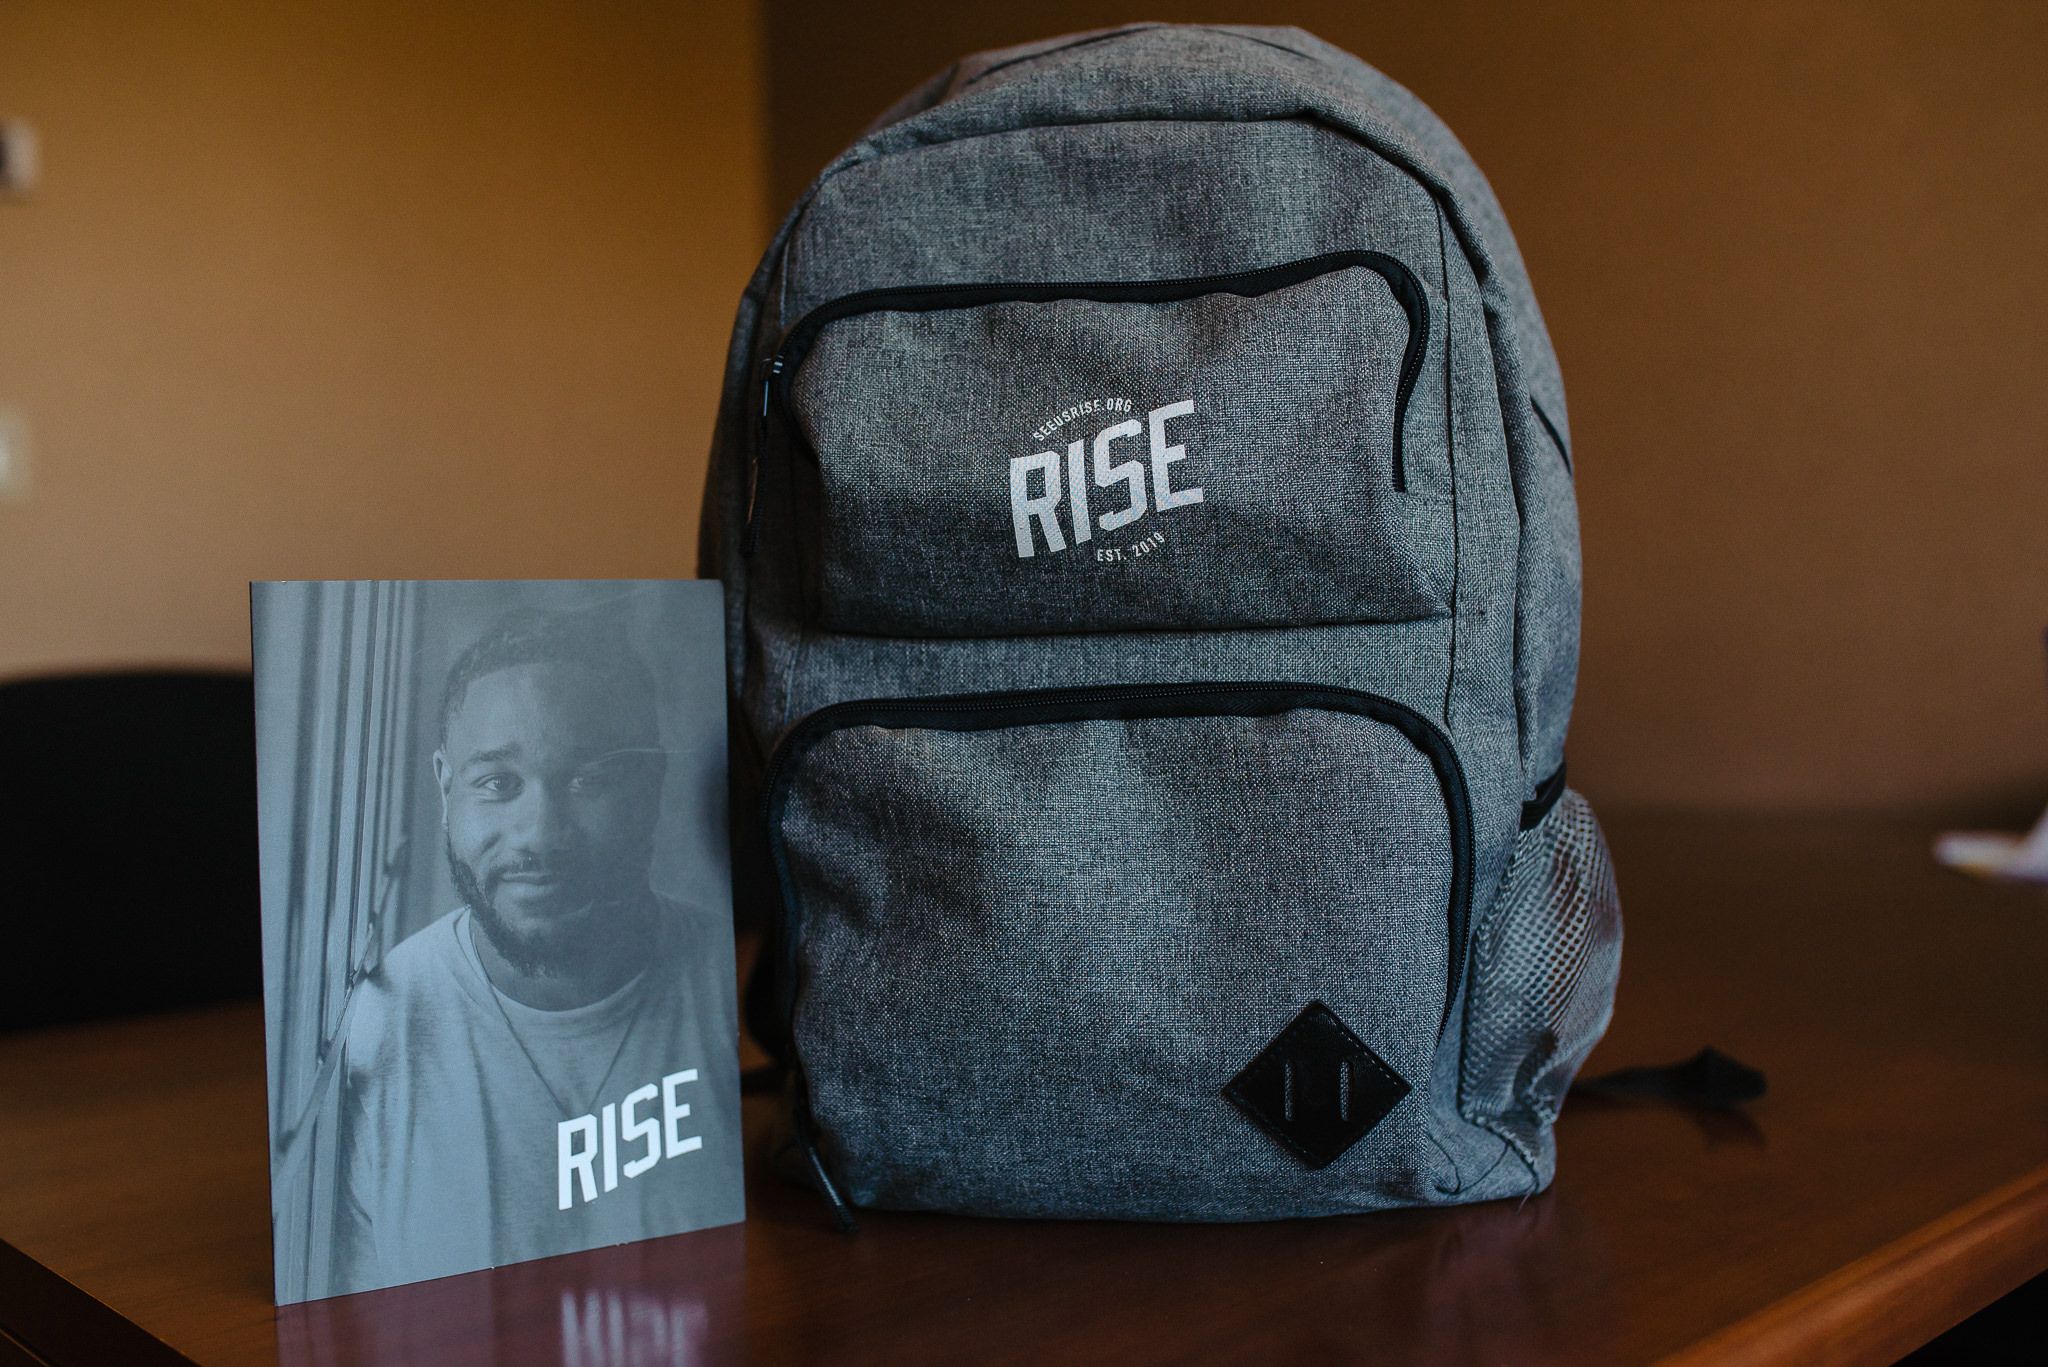 RISE Welcome Home Bags!